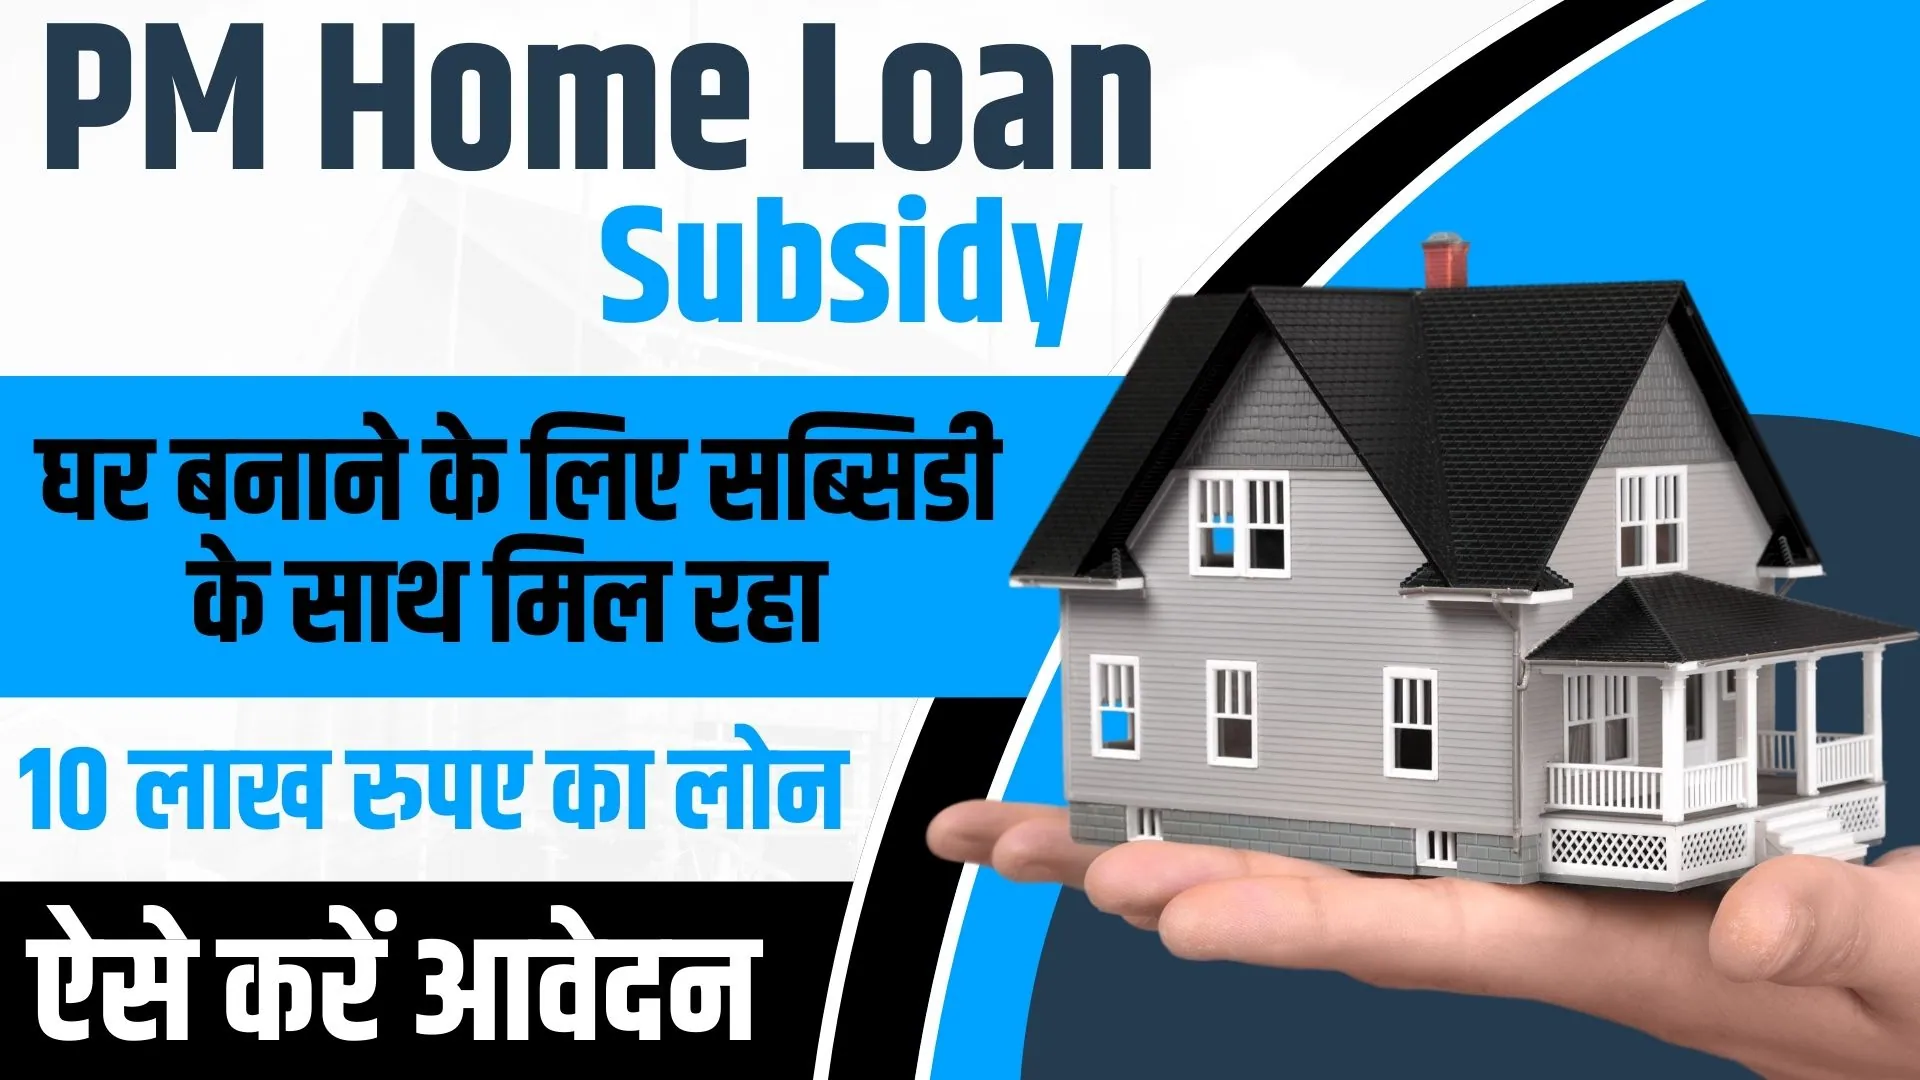 PM Home Loan Subsidy